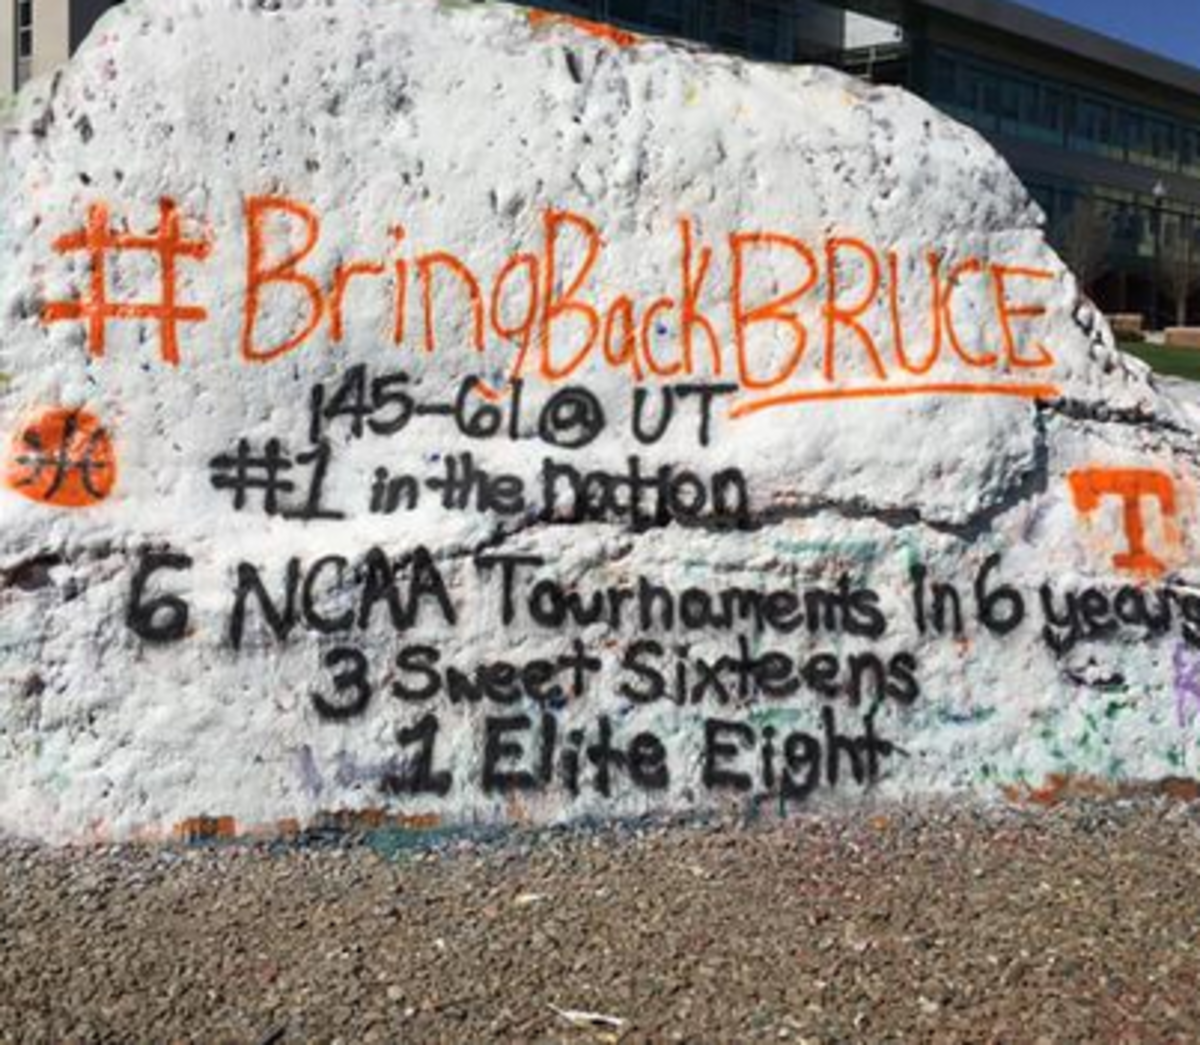 Tennessee rock spray painted with "Bring Back Bruce."